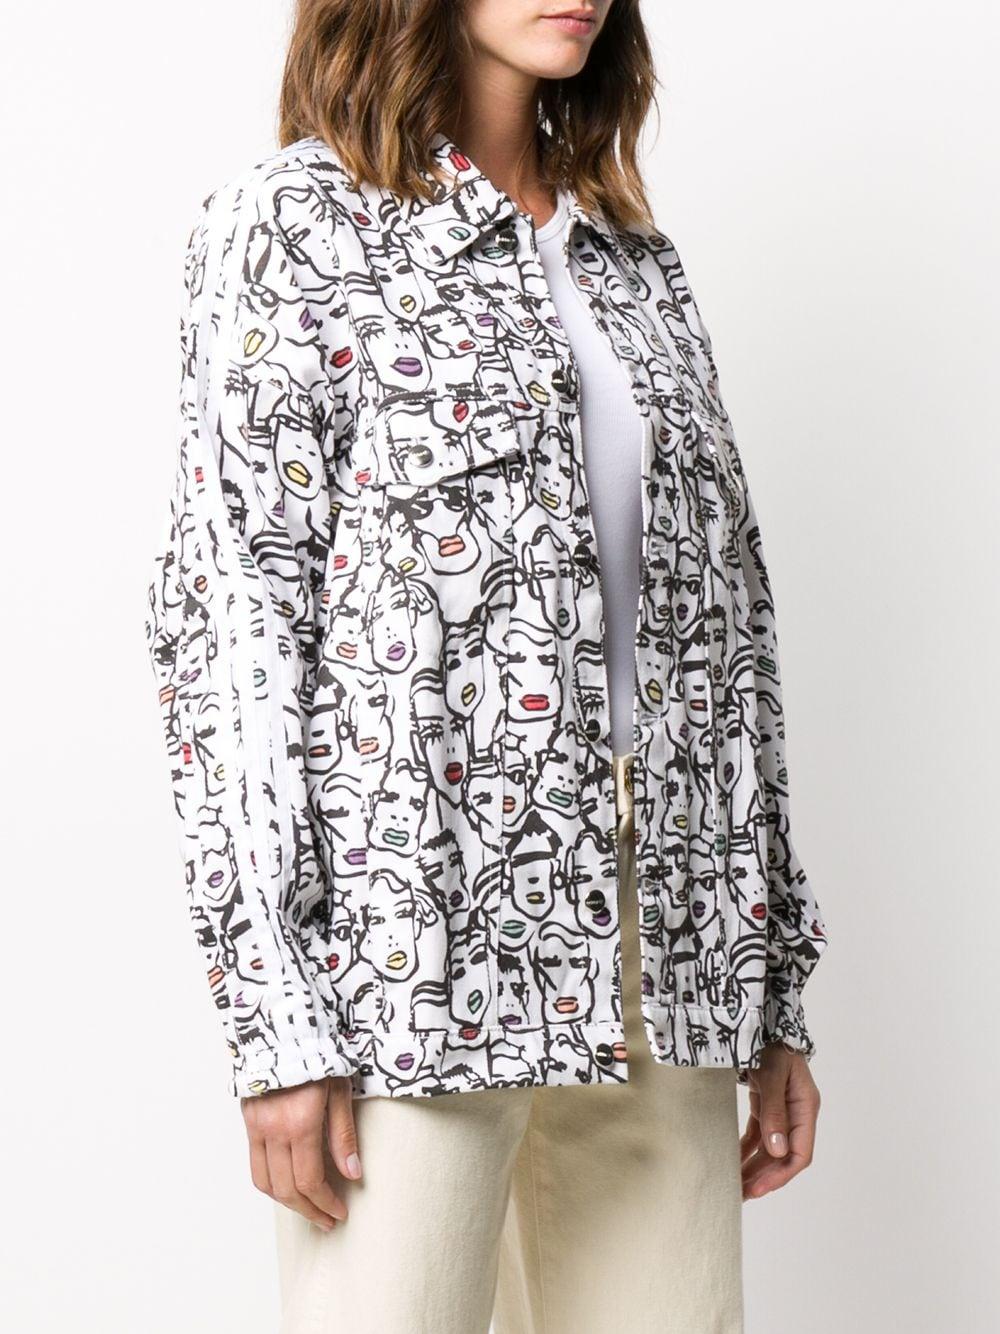 View the Internet organic thickness adidas X Fiorucci Denim Jacket in White | Lyst